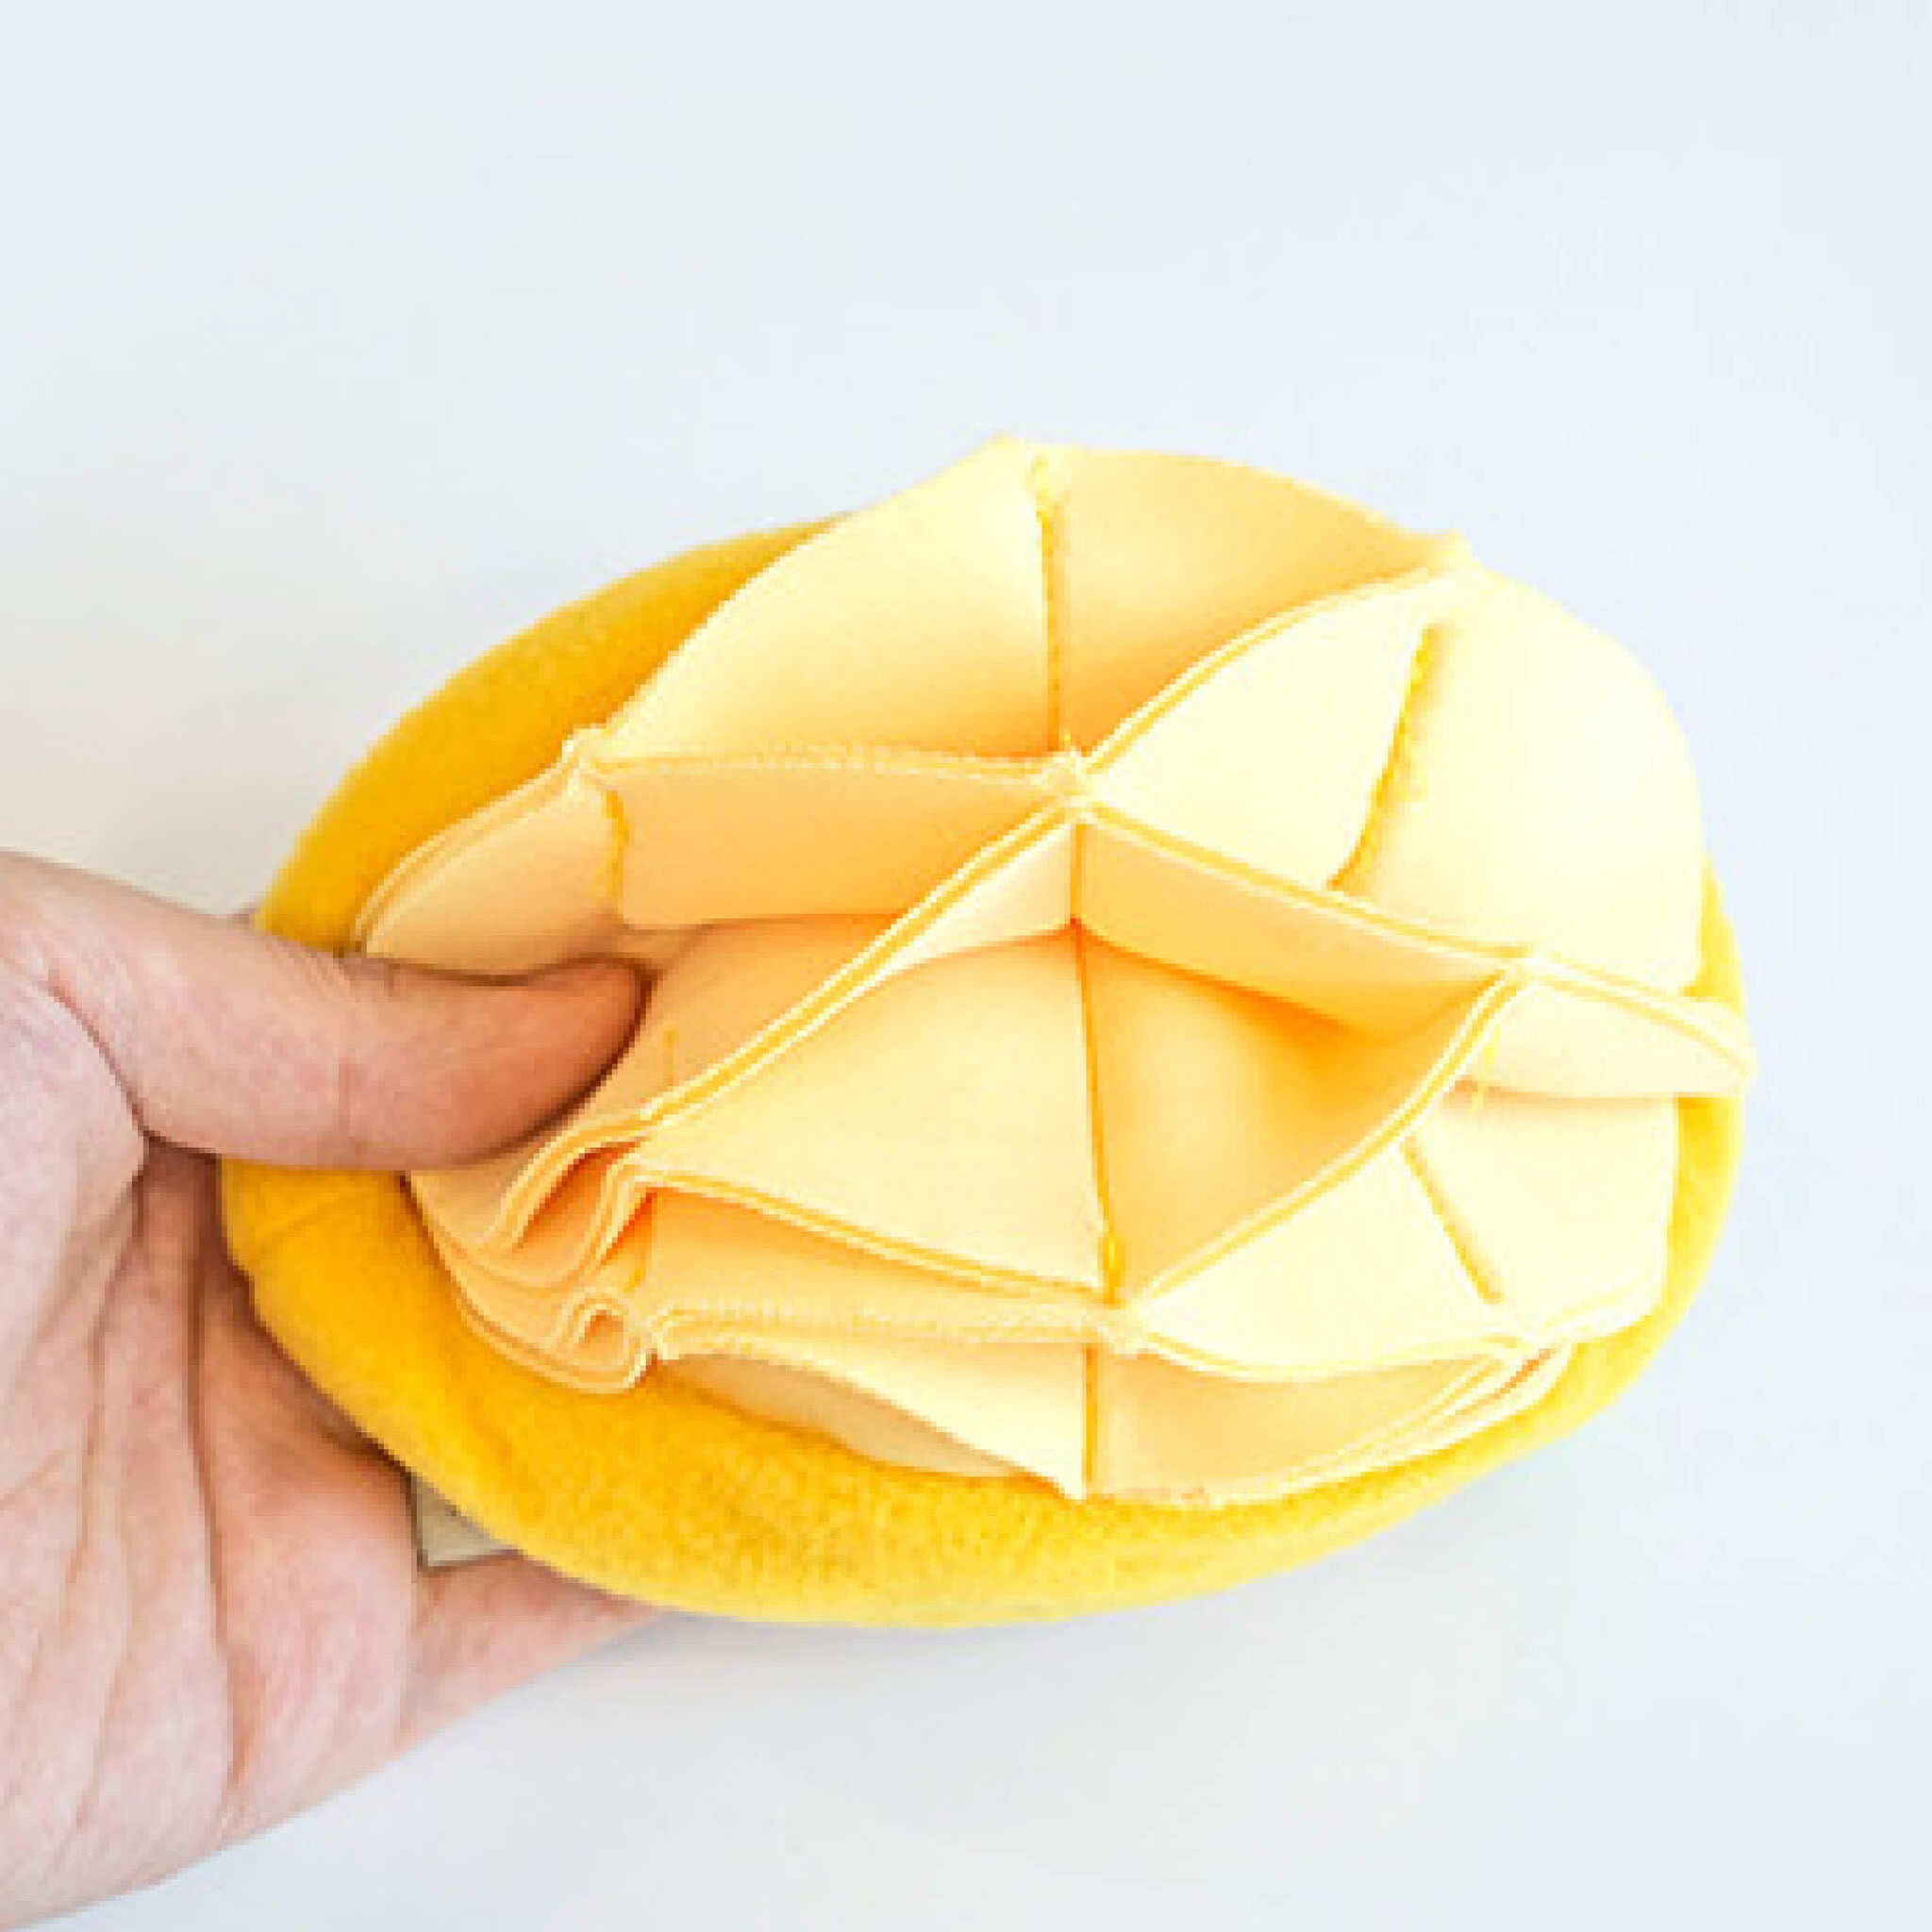 Inside the mango nosework toy.